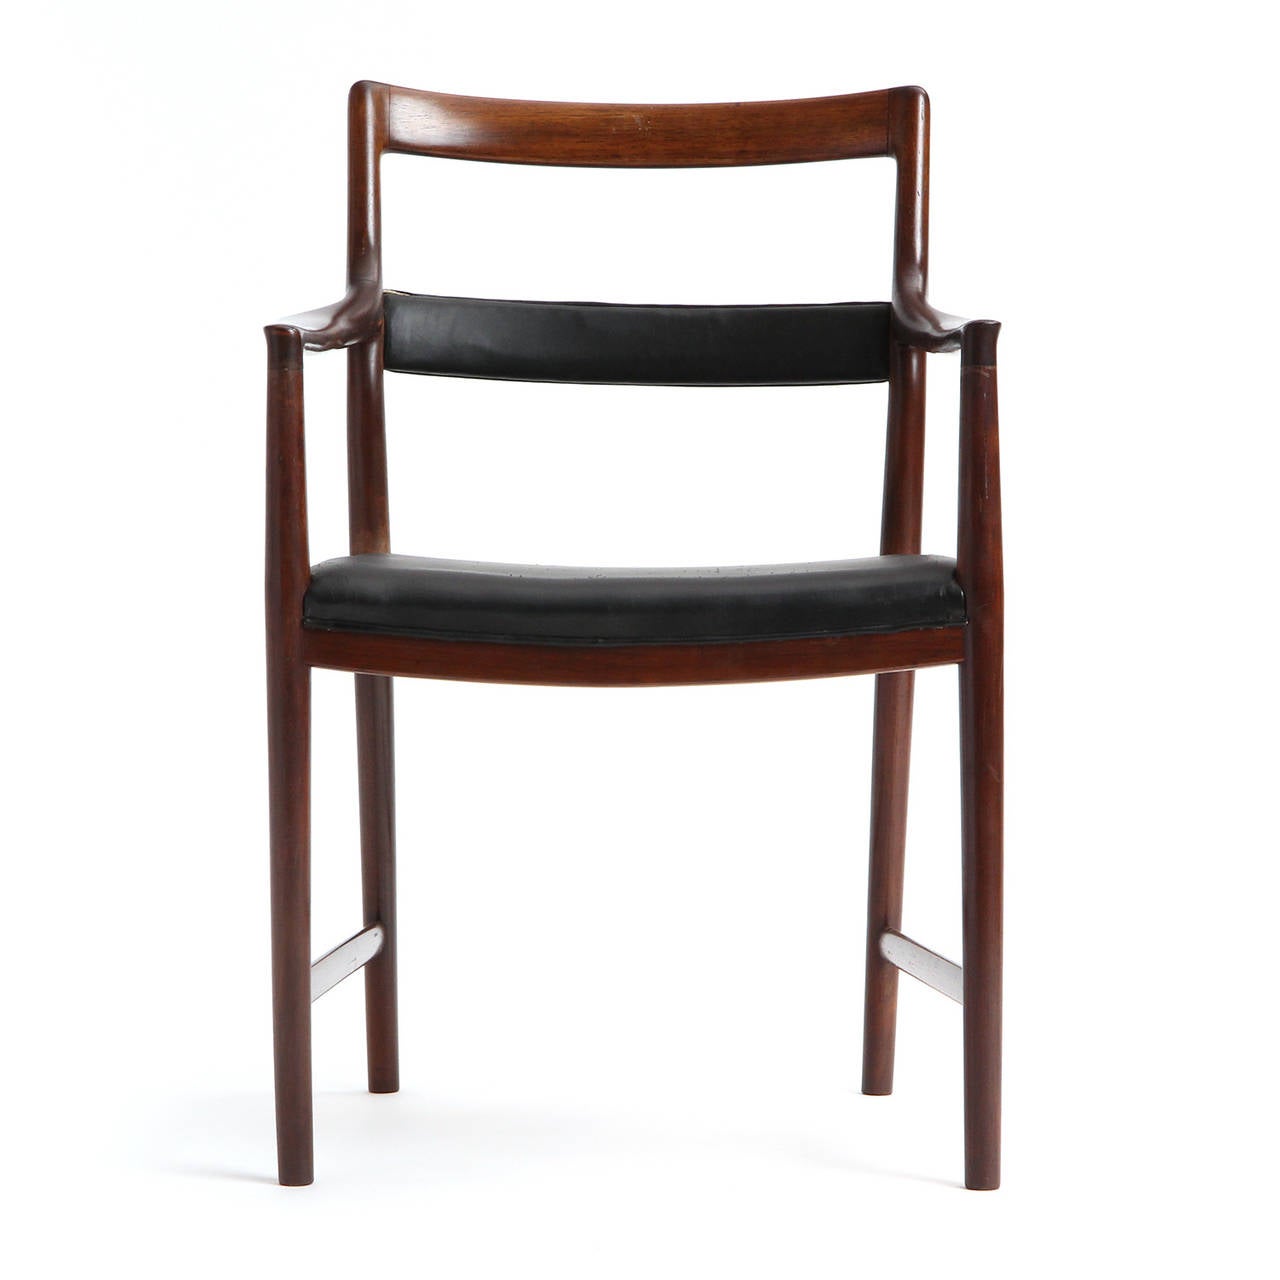 A fine, sculptural and spare group of ladder back dining chairs having luminous Brazilian rosewood frames with black leather seats and expressive leather-wrapped center slats.